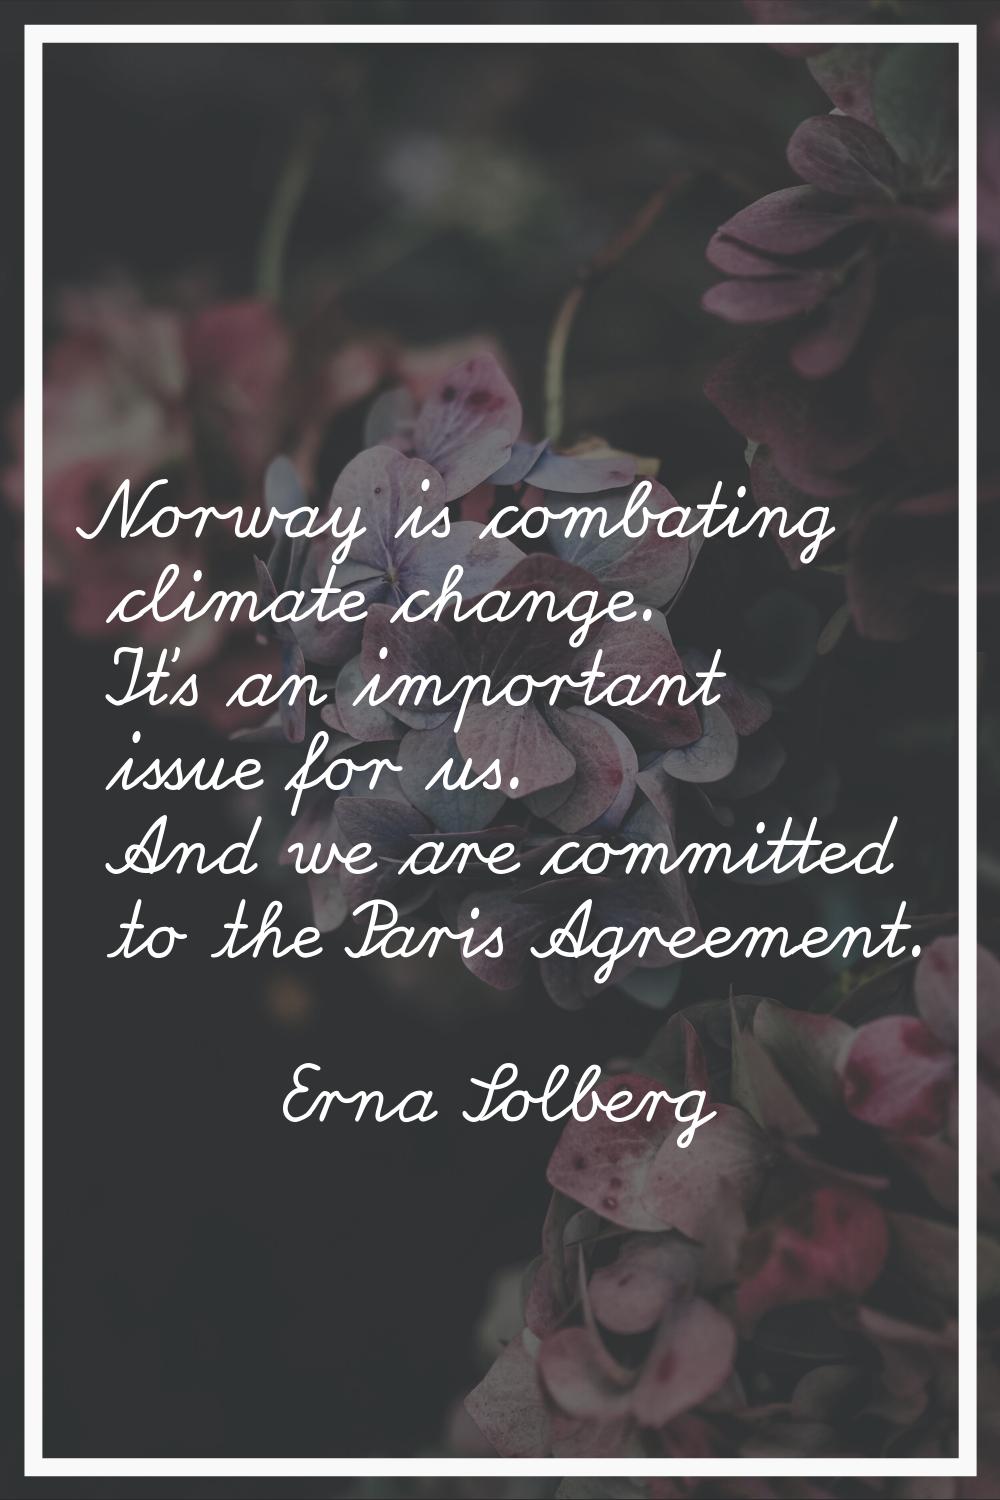 Norway is combating climate change. It's an important issue for us. And we are committed to the Par